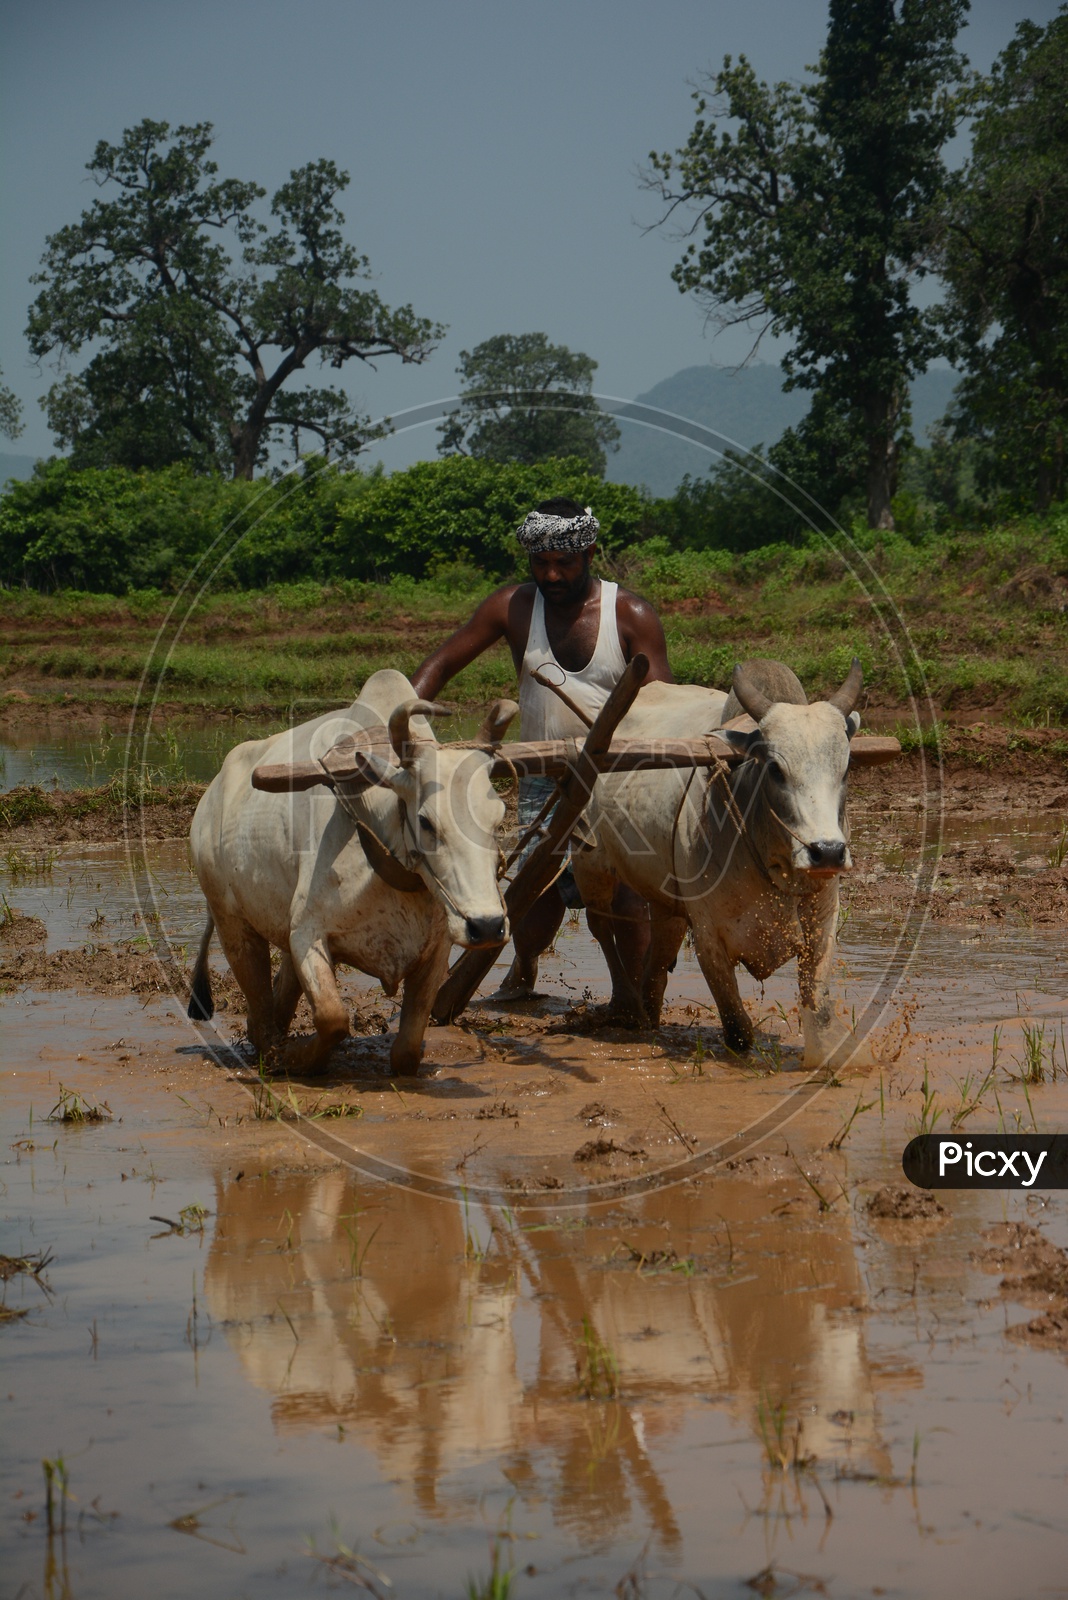 Indian Farmer Ploughing  Agricultural Field With Bullocks In Old Traditional Way  In Rural Villages